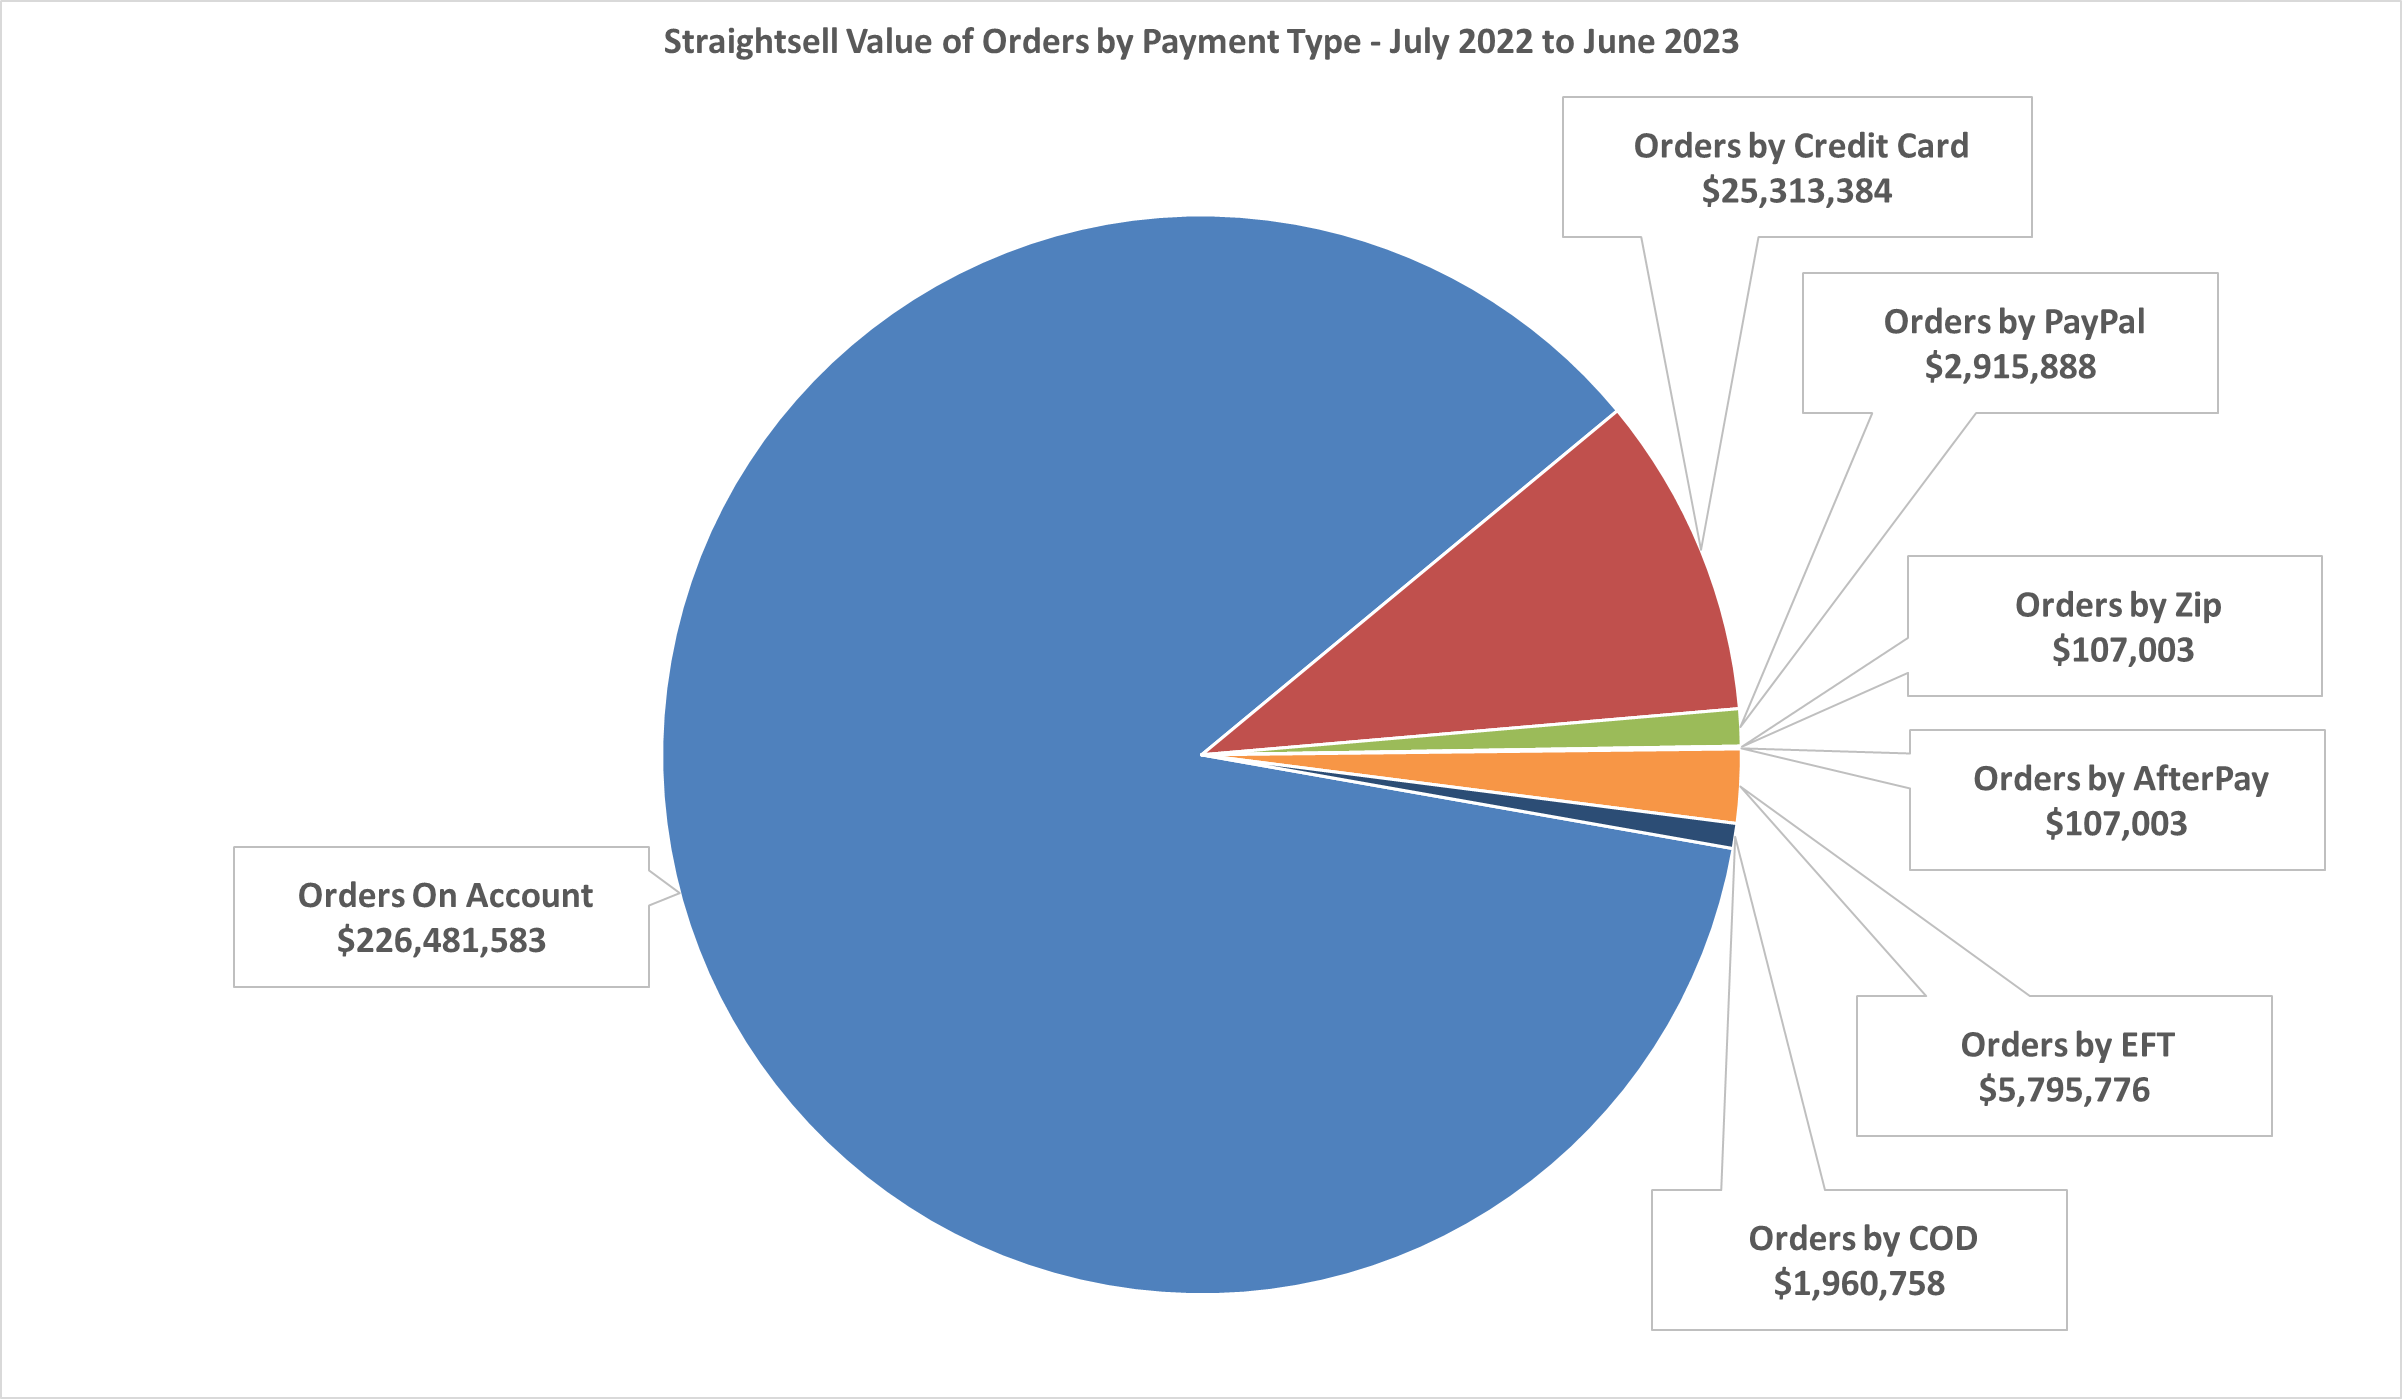 Straightsell Value of Orders by Payment Type - July 2022 thru June 2023